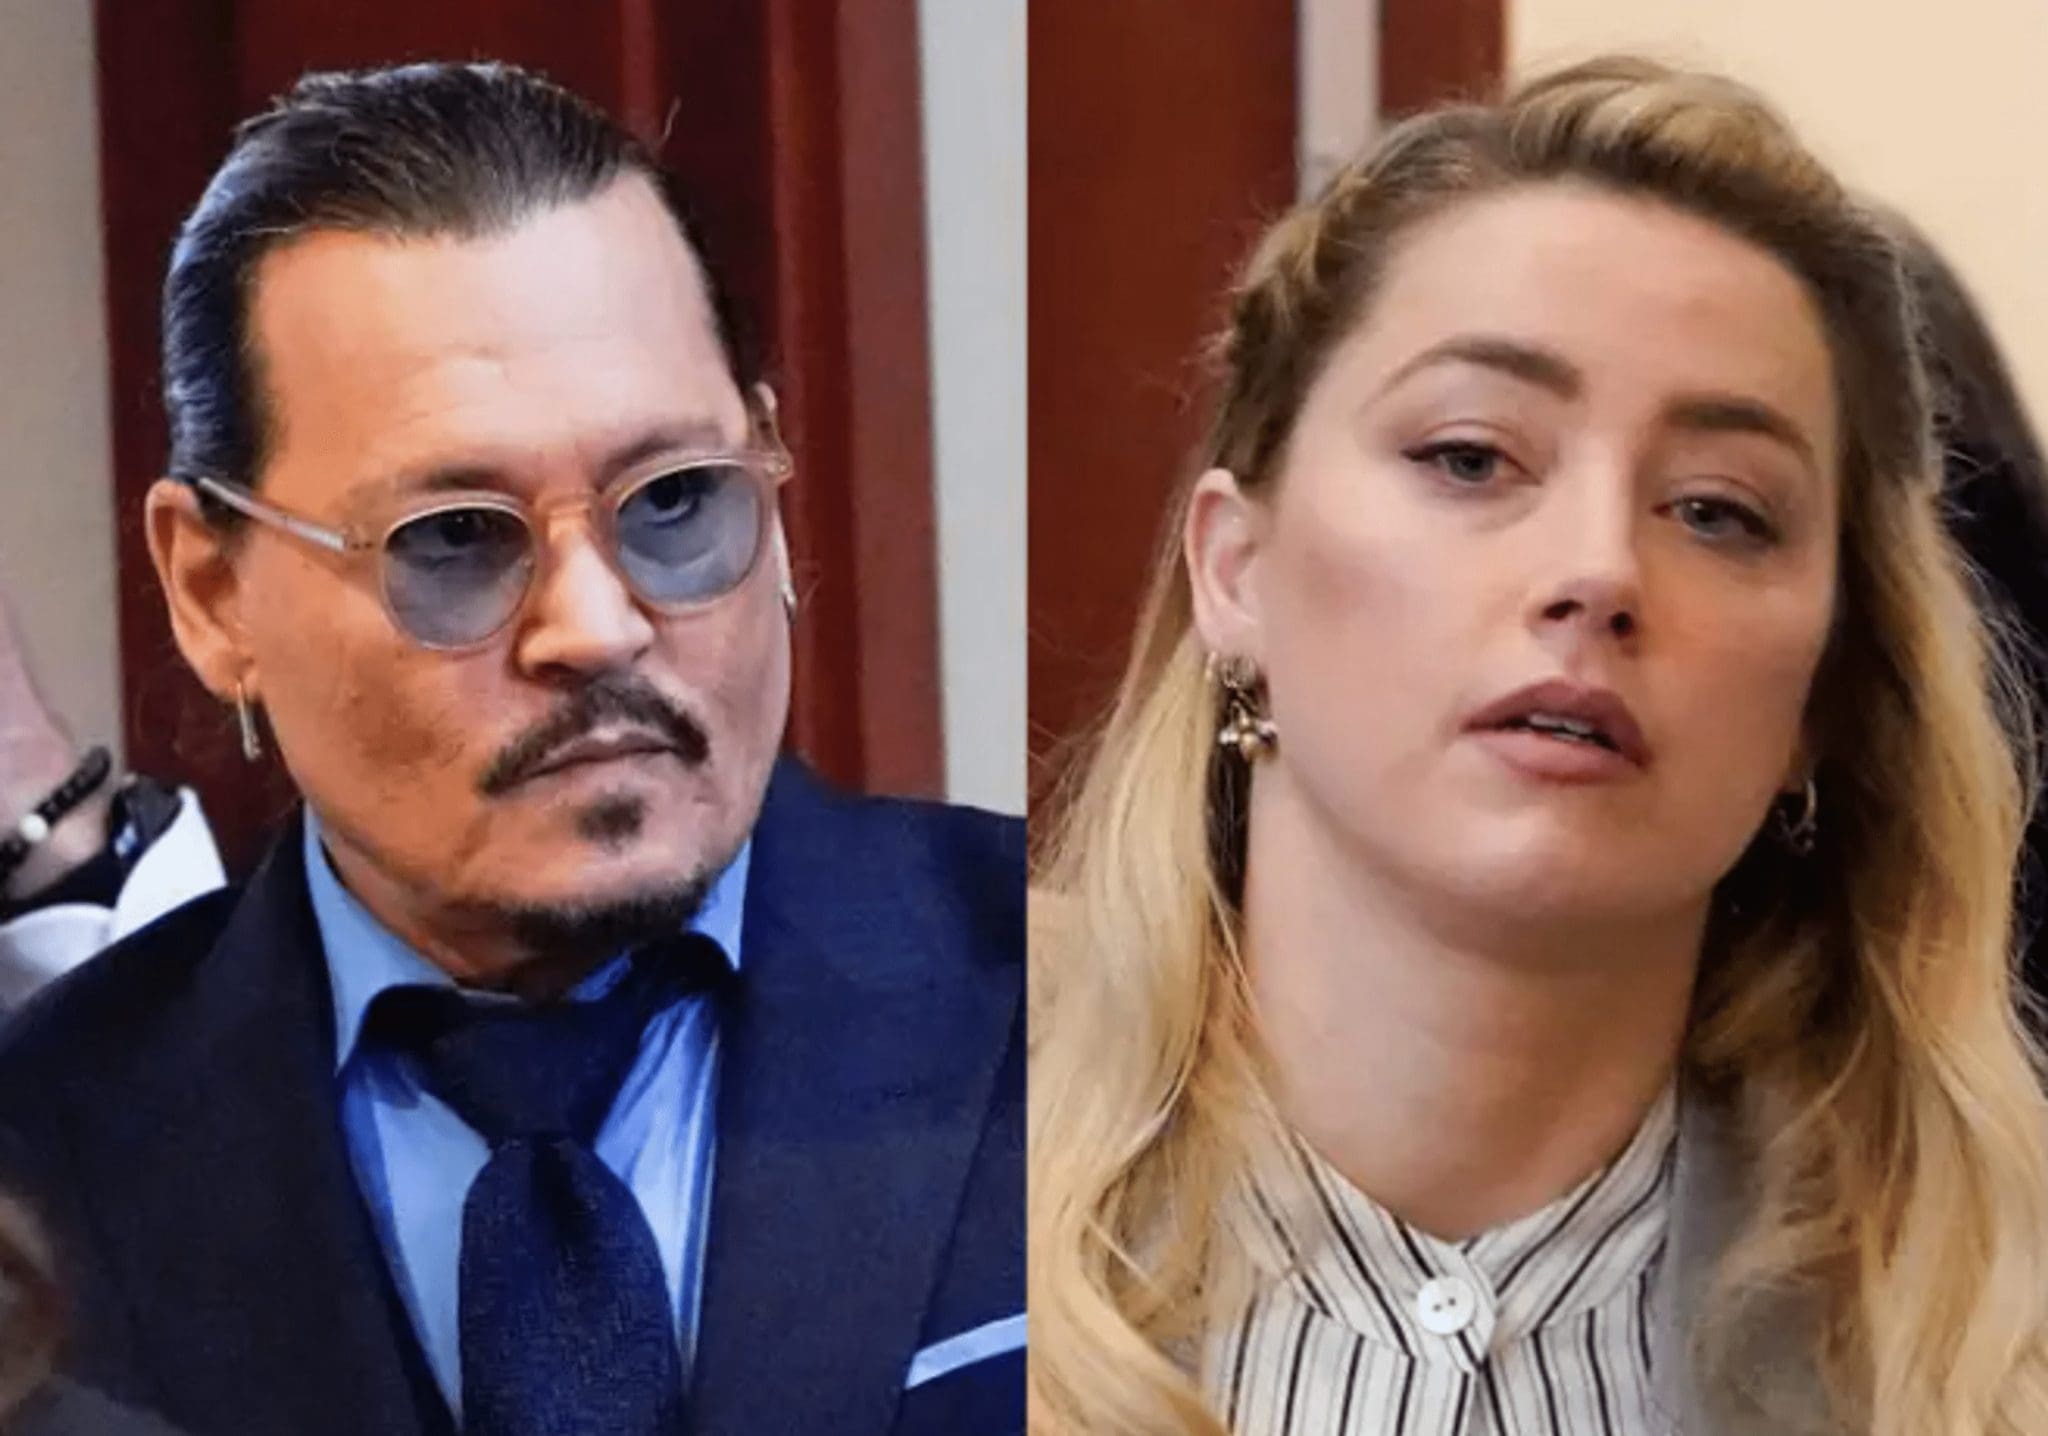 The court will soon issue a verdict in the case of Johnny Depp and Amber Heard